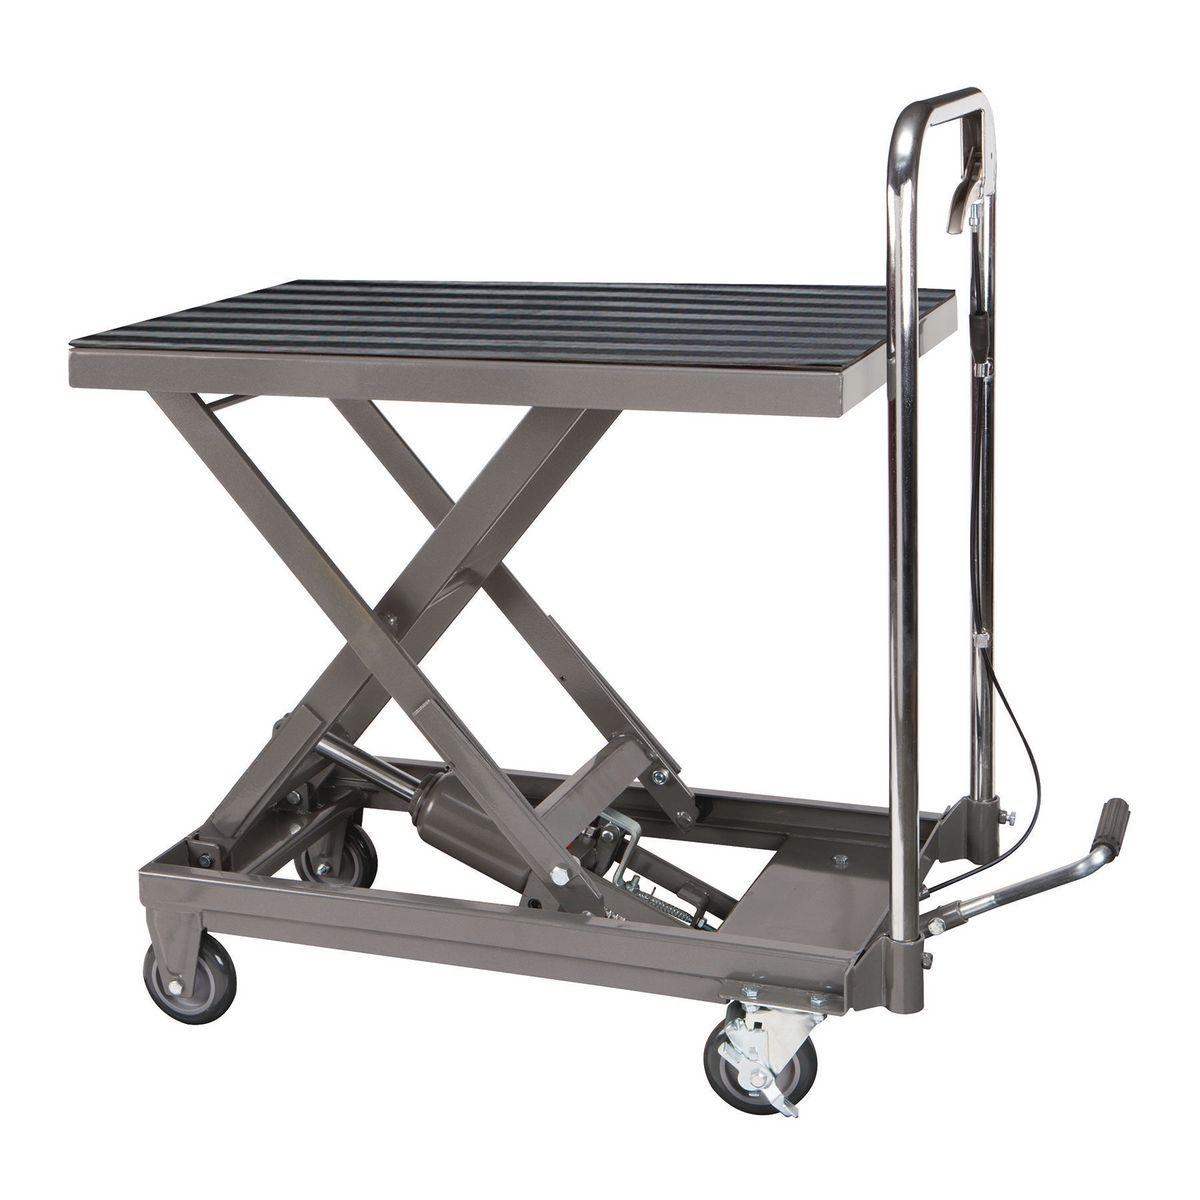 PITTSBURGH AUTOMOTIVE 500 lbs. Capacity Hydraulic Table Cart - Item 61405 / 60730 / 94822